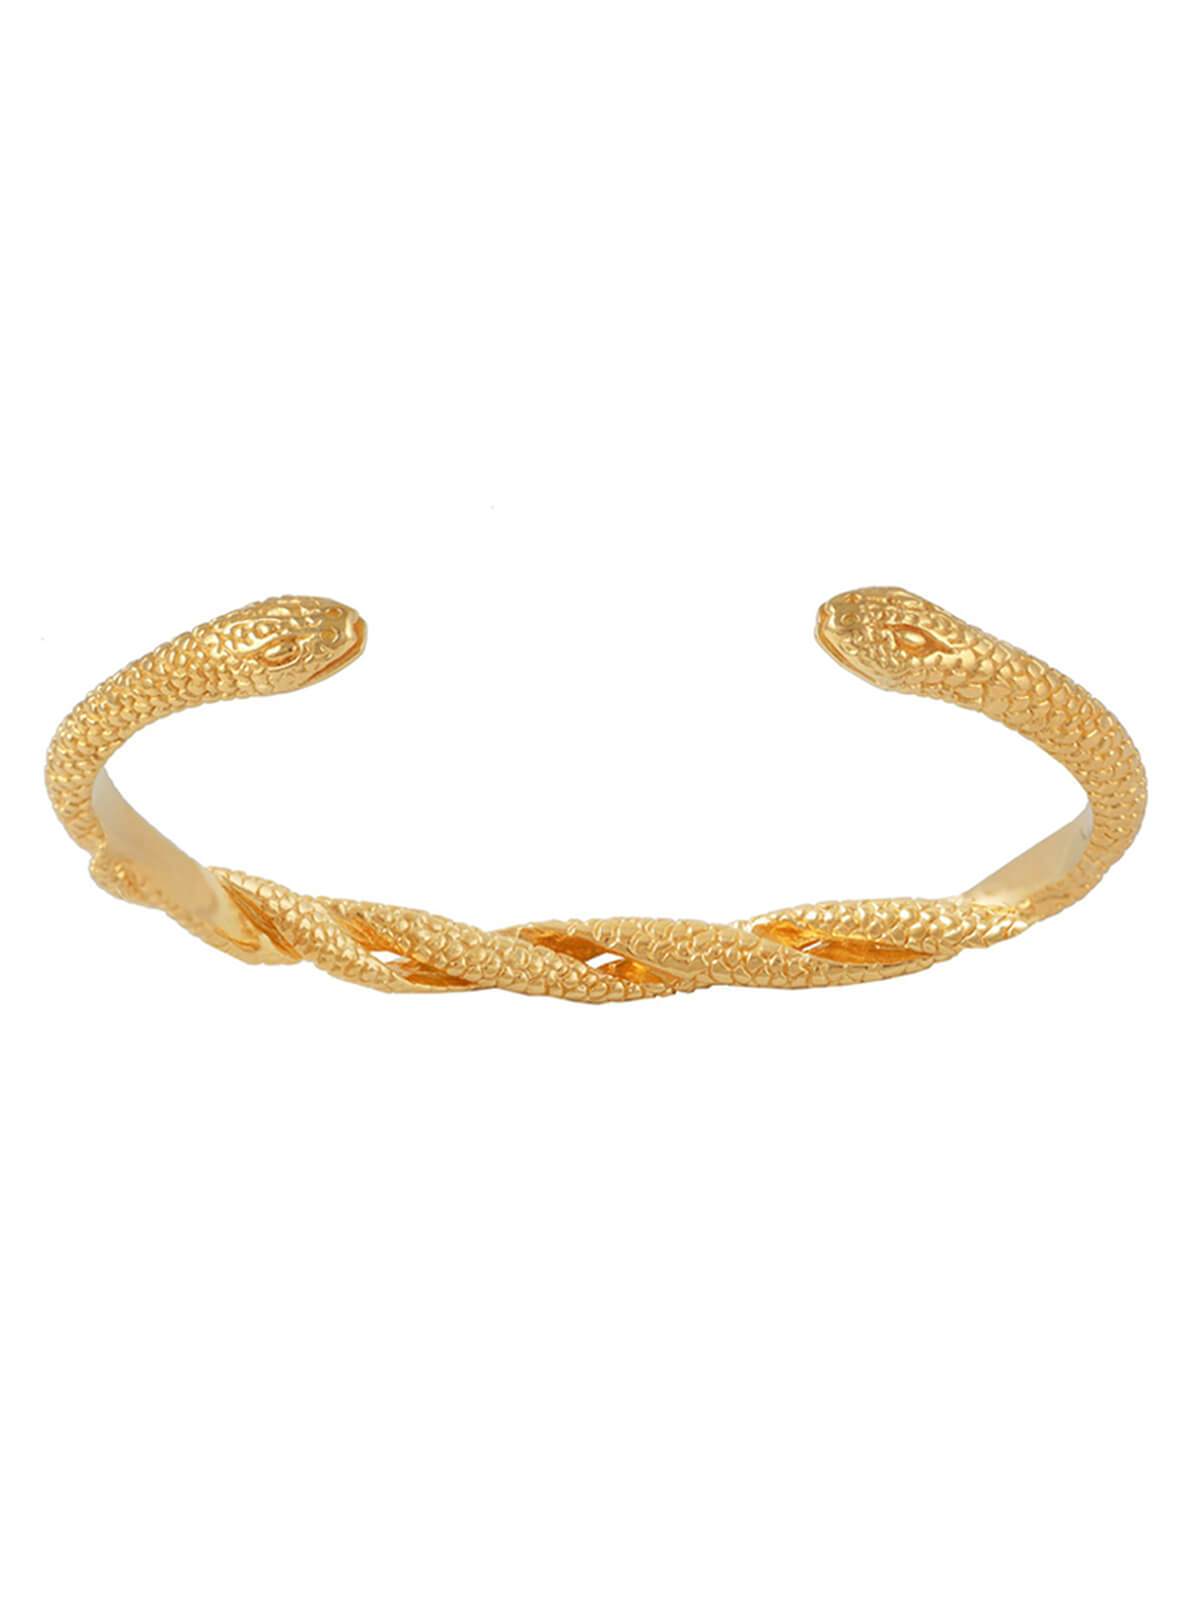 Intertwined snakes bracelet cuff. Silver, gold-plated